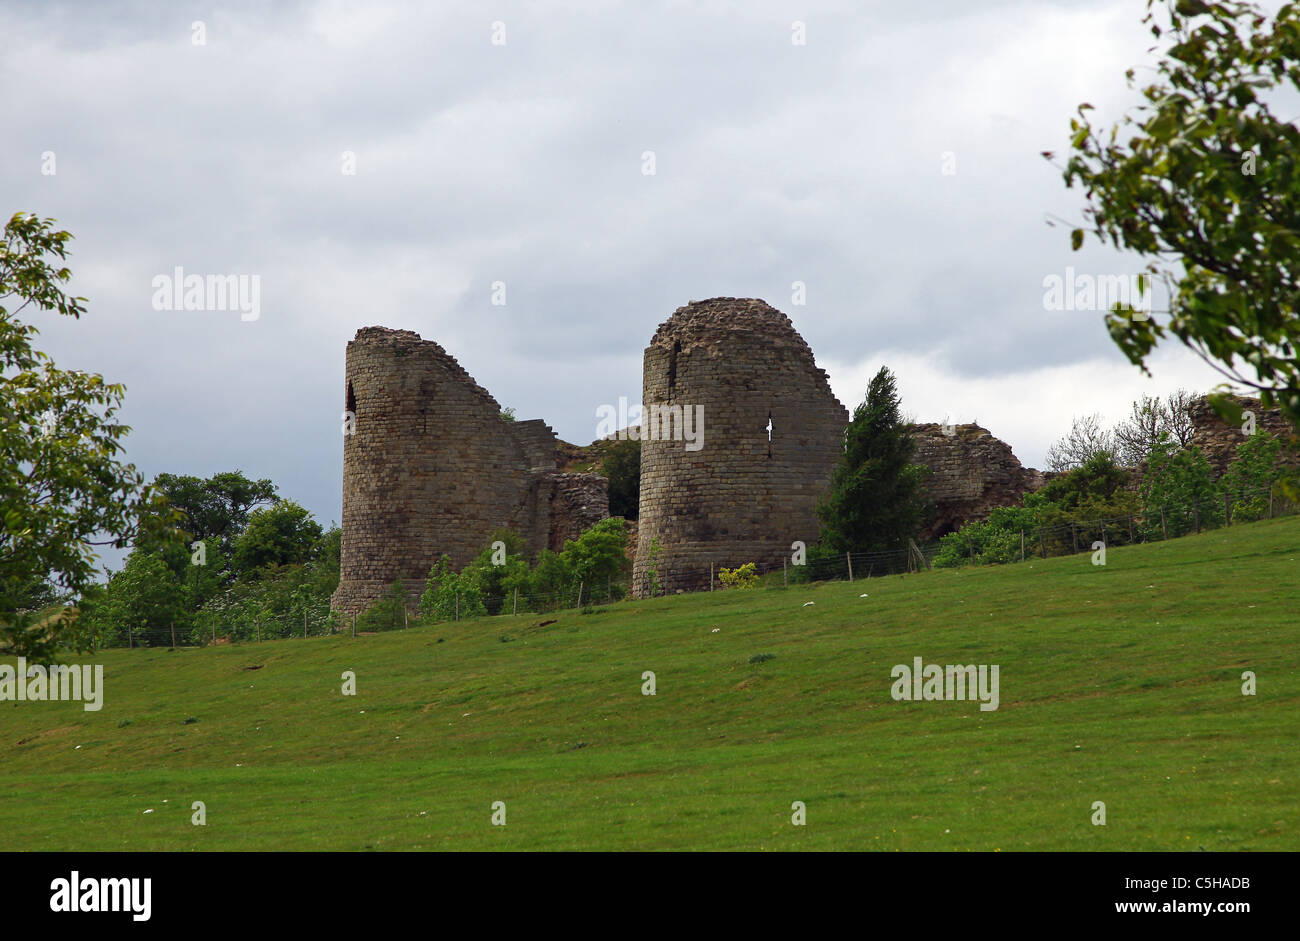 The ruins of Chartley Castle, a motte and bailey castle at Stowe-by-Chartley  between Stafford and Uttoxeter, Staffordshire Stock Photo